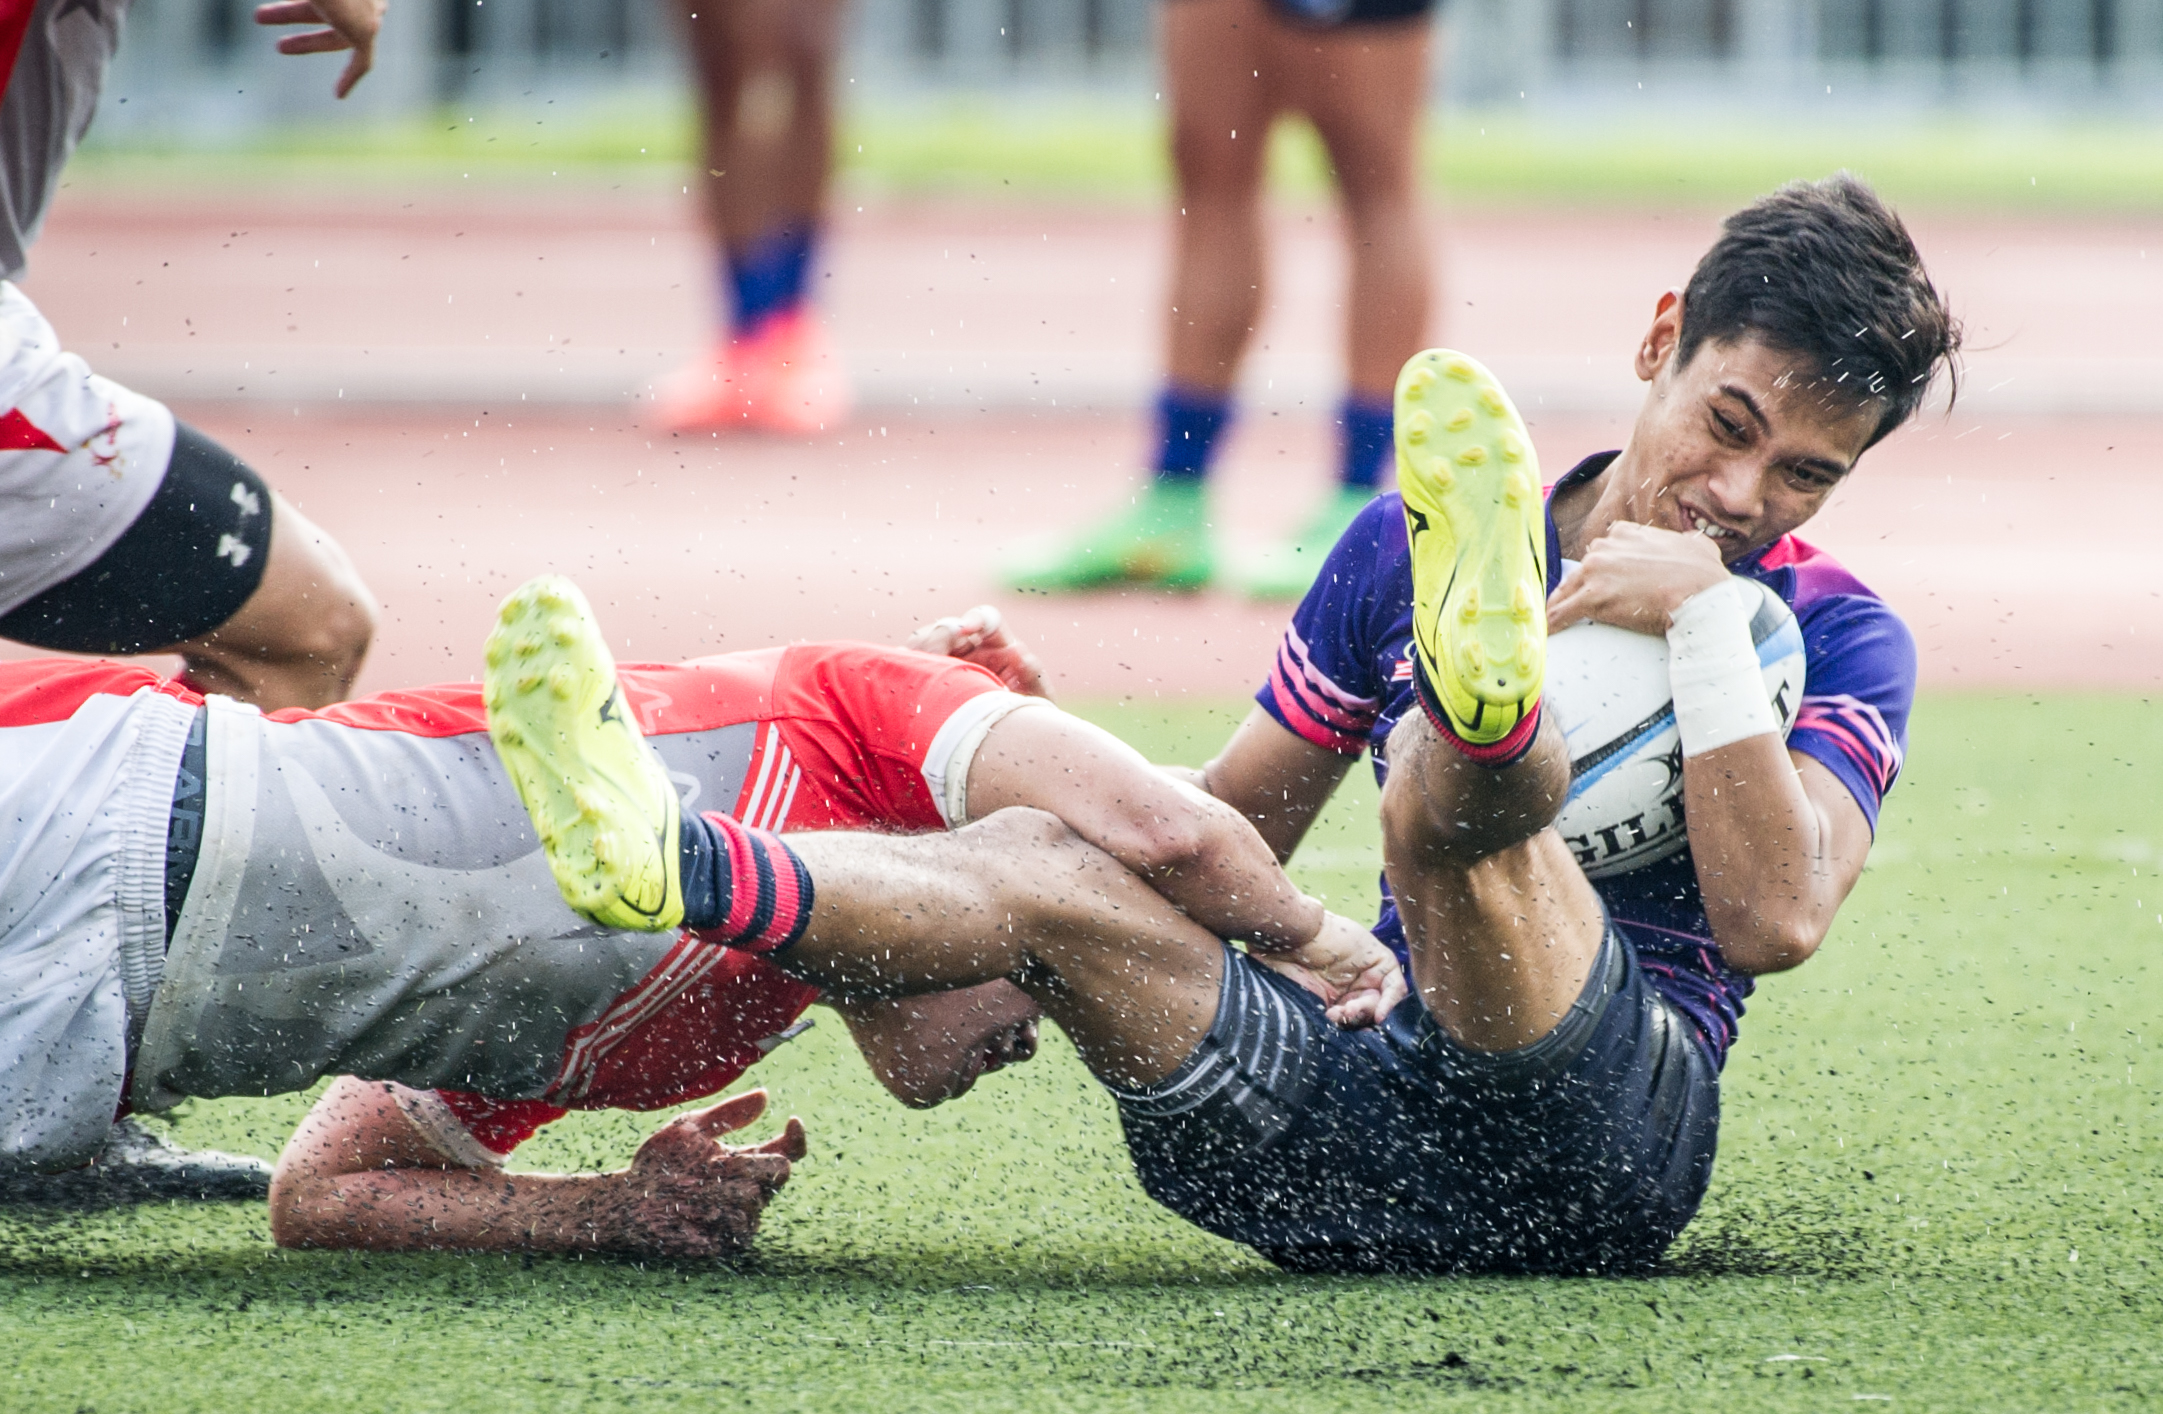 A Singaporean player tackles a Malaysian player during the rugby competition of the ASEAN University Games at the Nanyang Technological University.